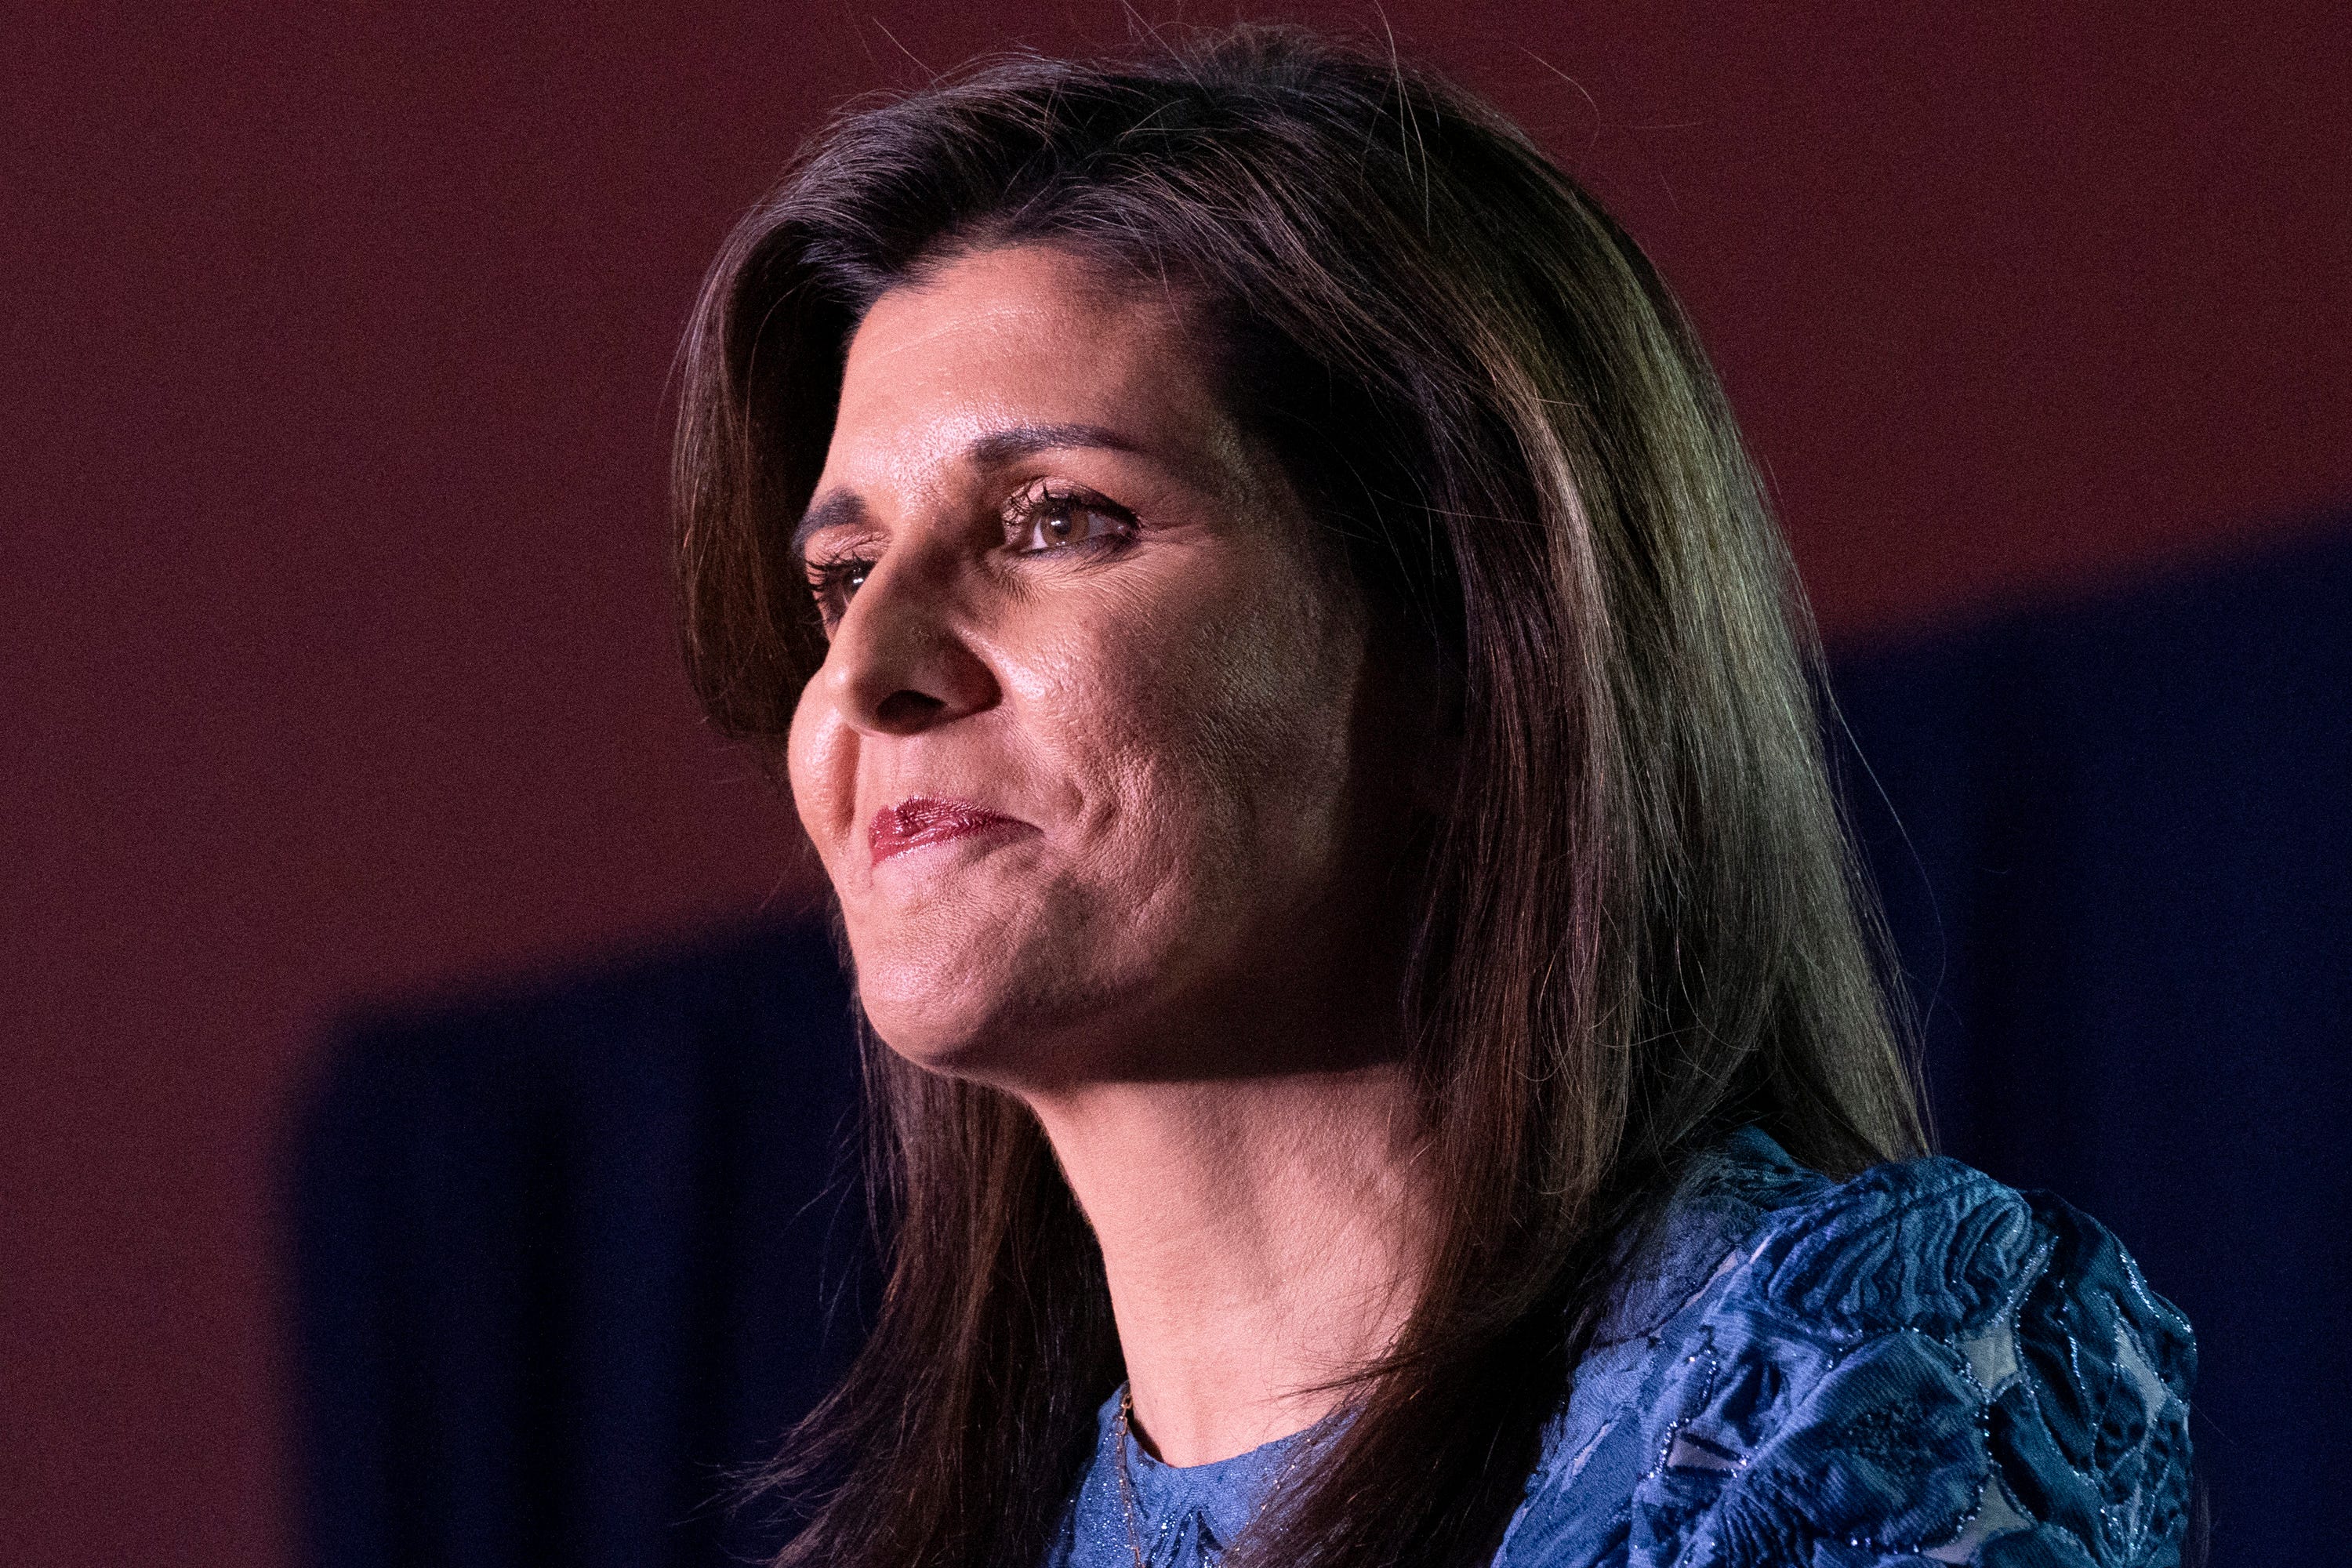 'who is the real nikki haley?': south carolina voters criticize mixed messages on racism